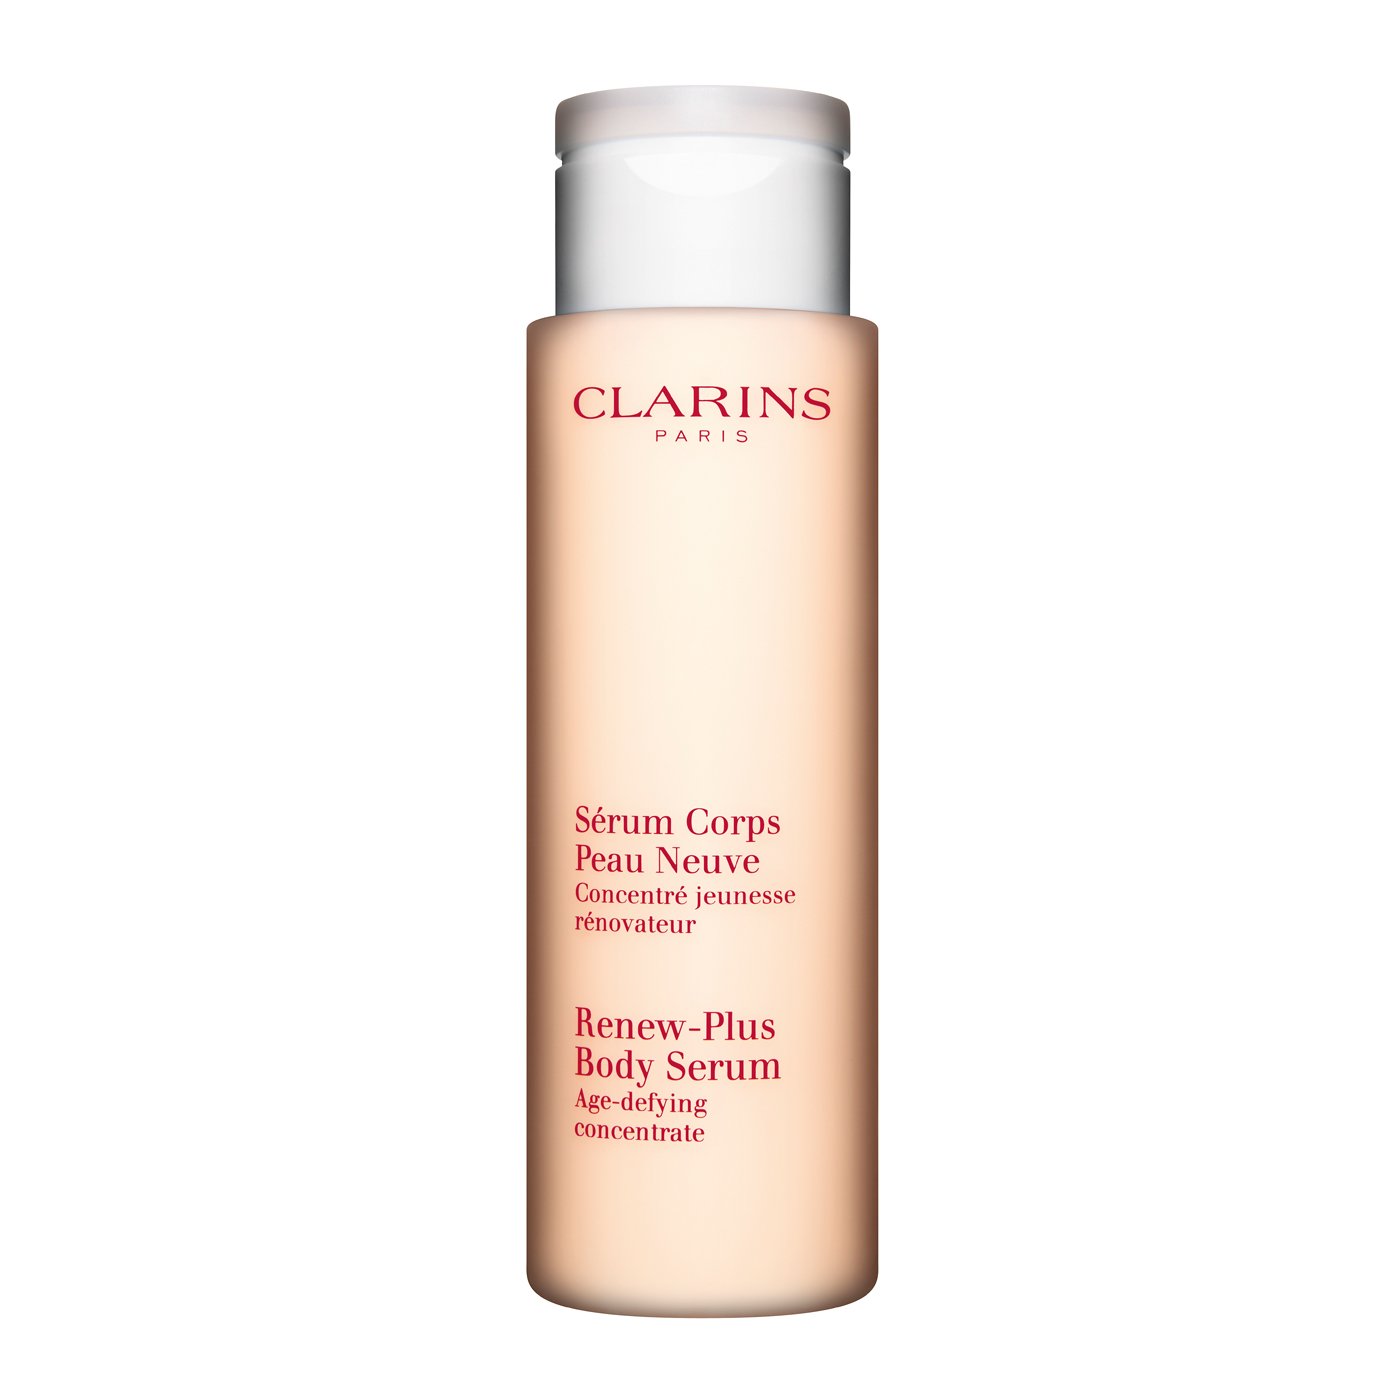 Clarins Body Fit Anti-Cellulite Contouring Expert 400ml/13.3oz buy in  United States with free shipping CosmoStore